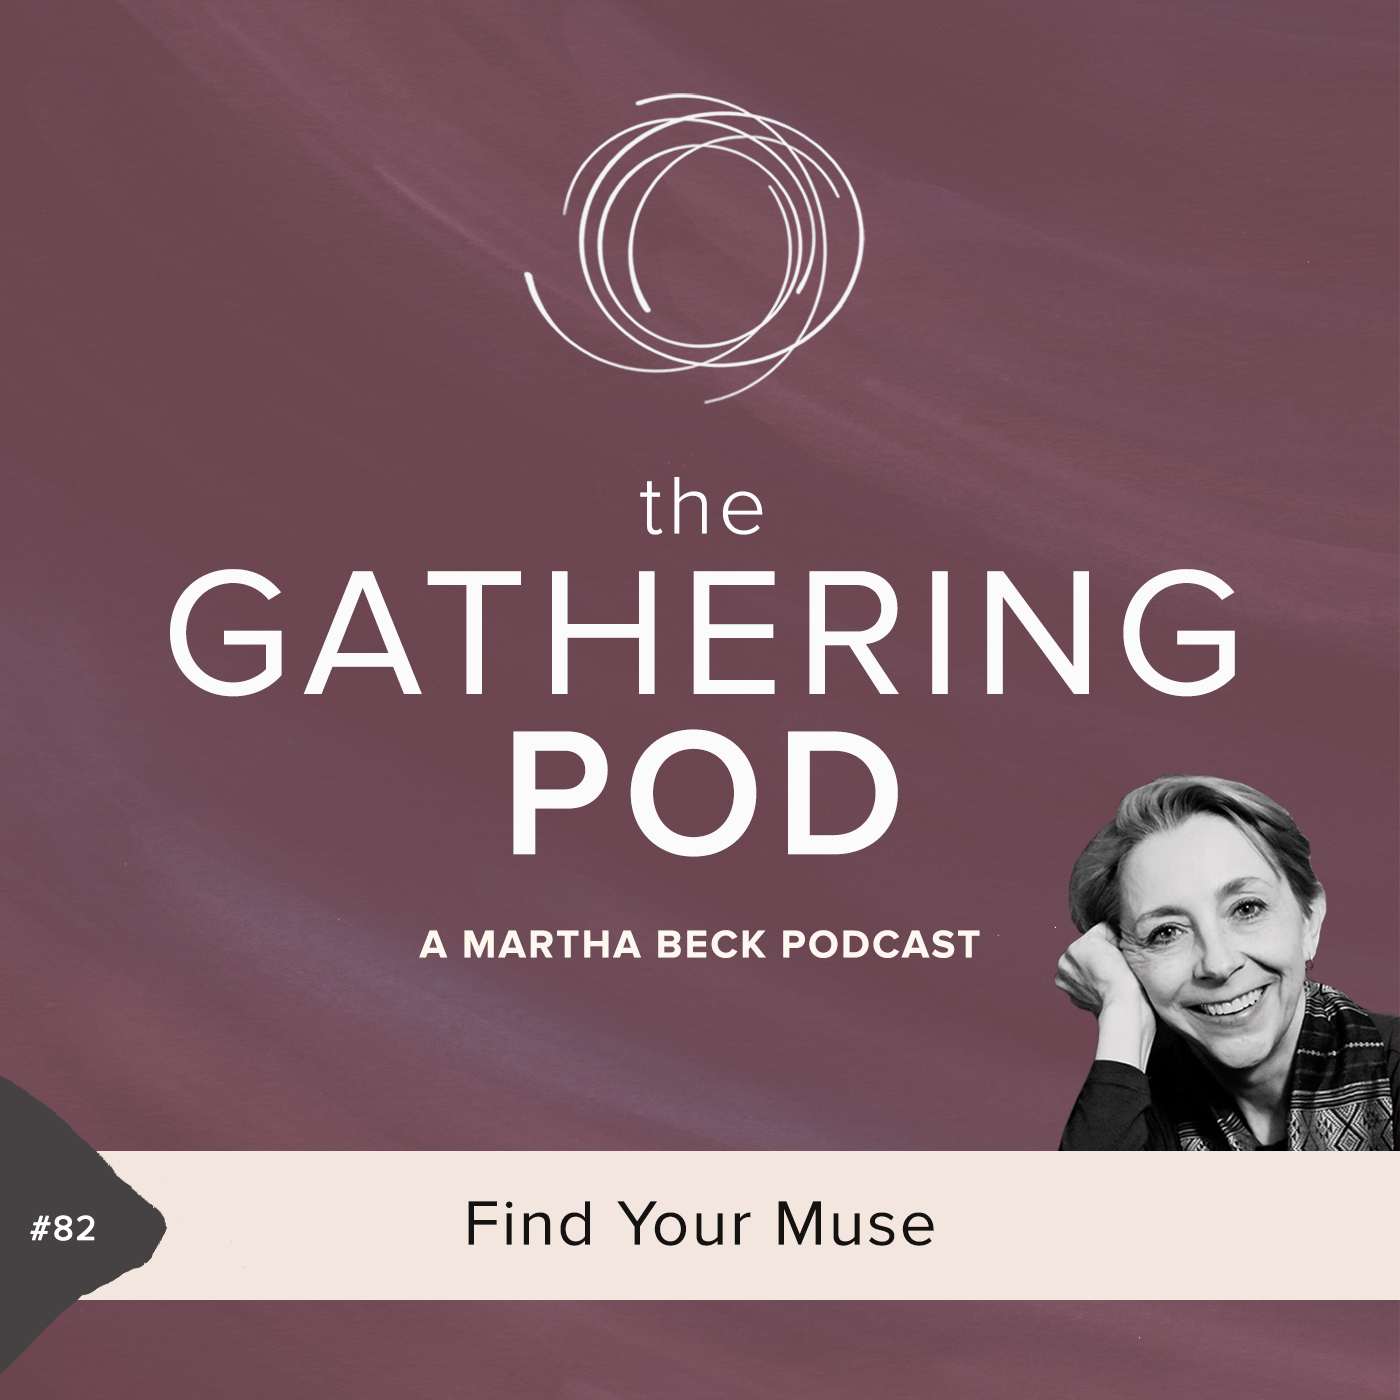 Image for The Gathering Pod A Martha Beck Podcast Episode #82 Find Your Muse